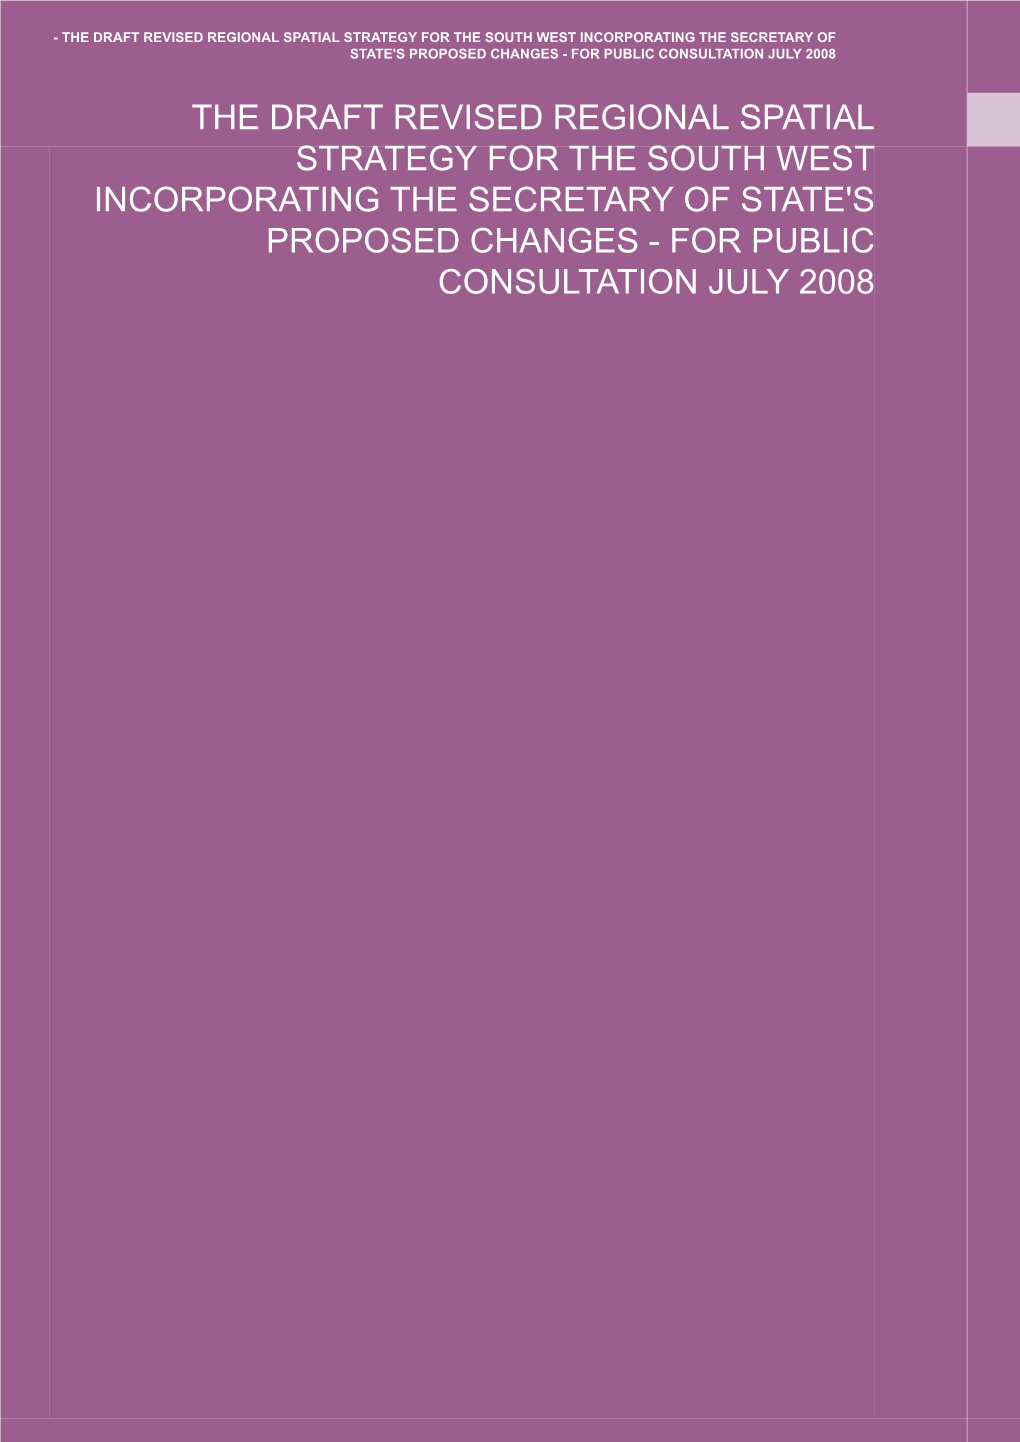 Draft Revised Regional Spatial Strategy for the South West Incorporating the Secretary of State's Proposed Changes - for Public Consultation July 2008